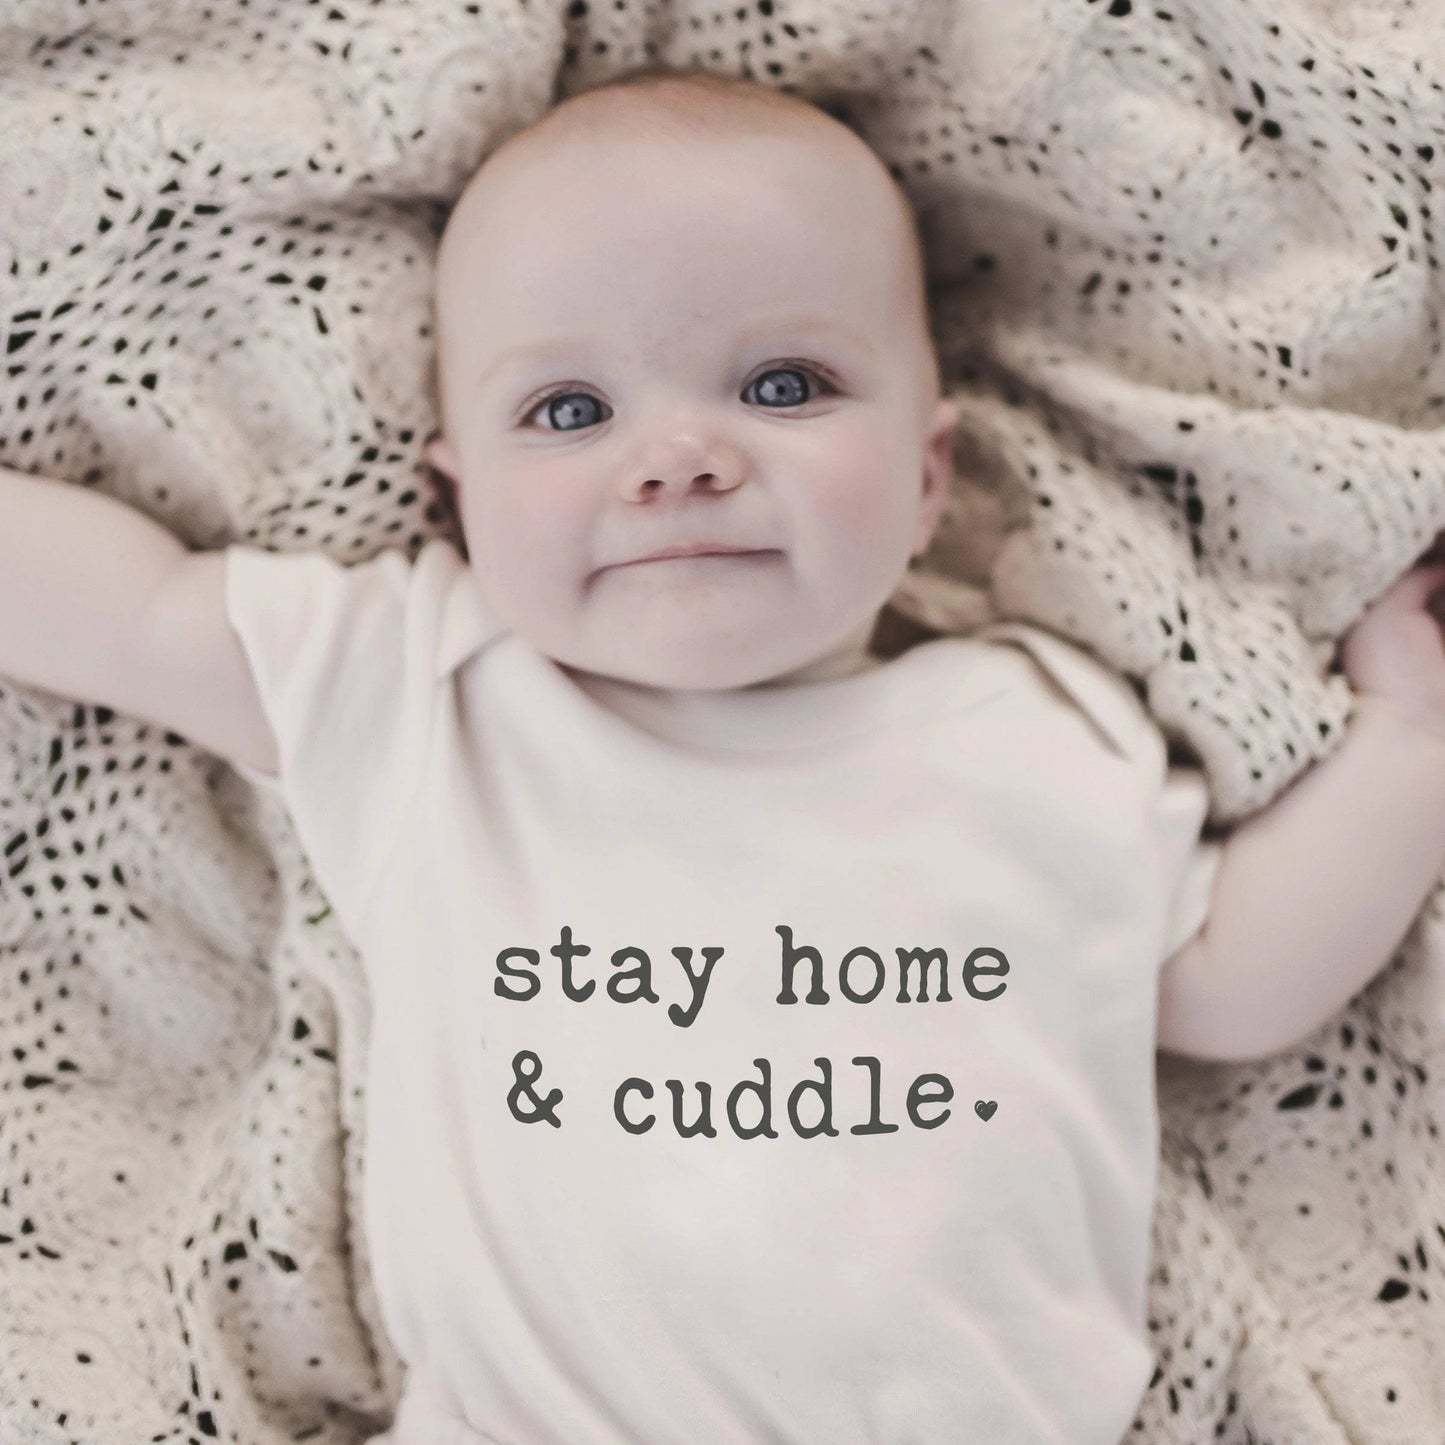 Finn+Emma Graphic Bodysuit in Stay Home and Cuddle